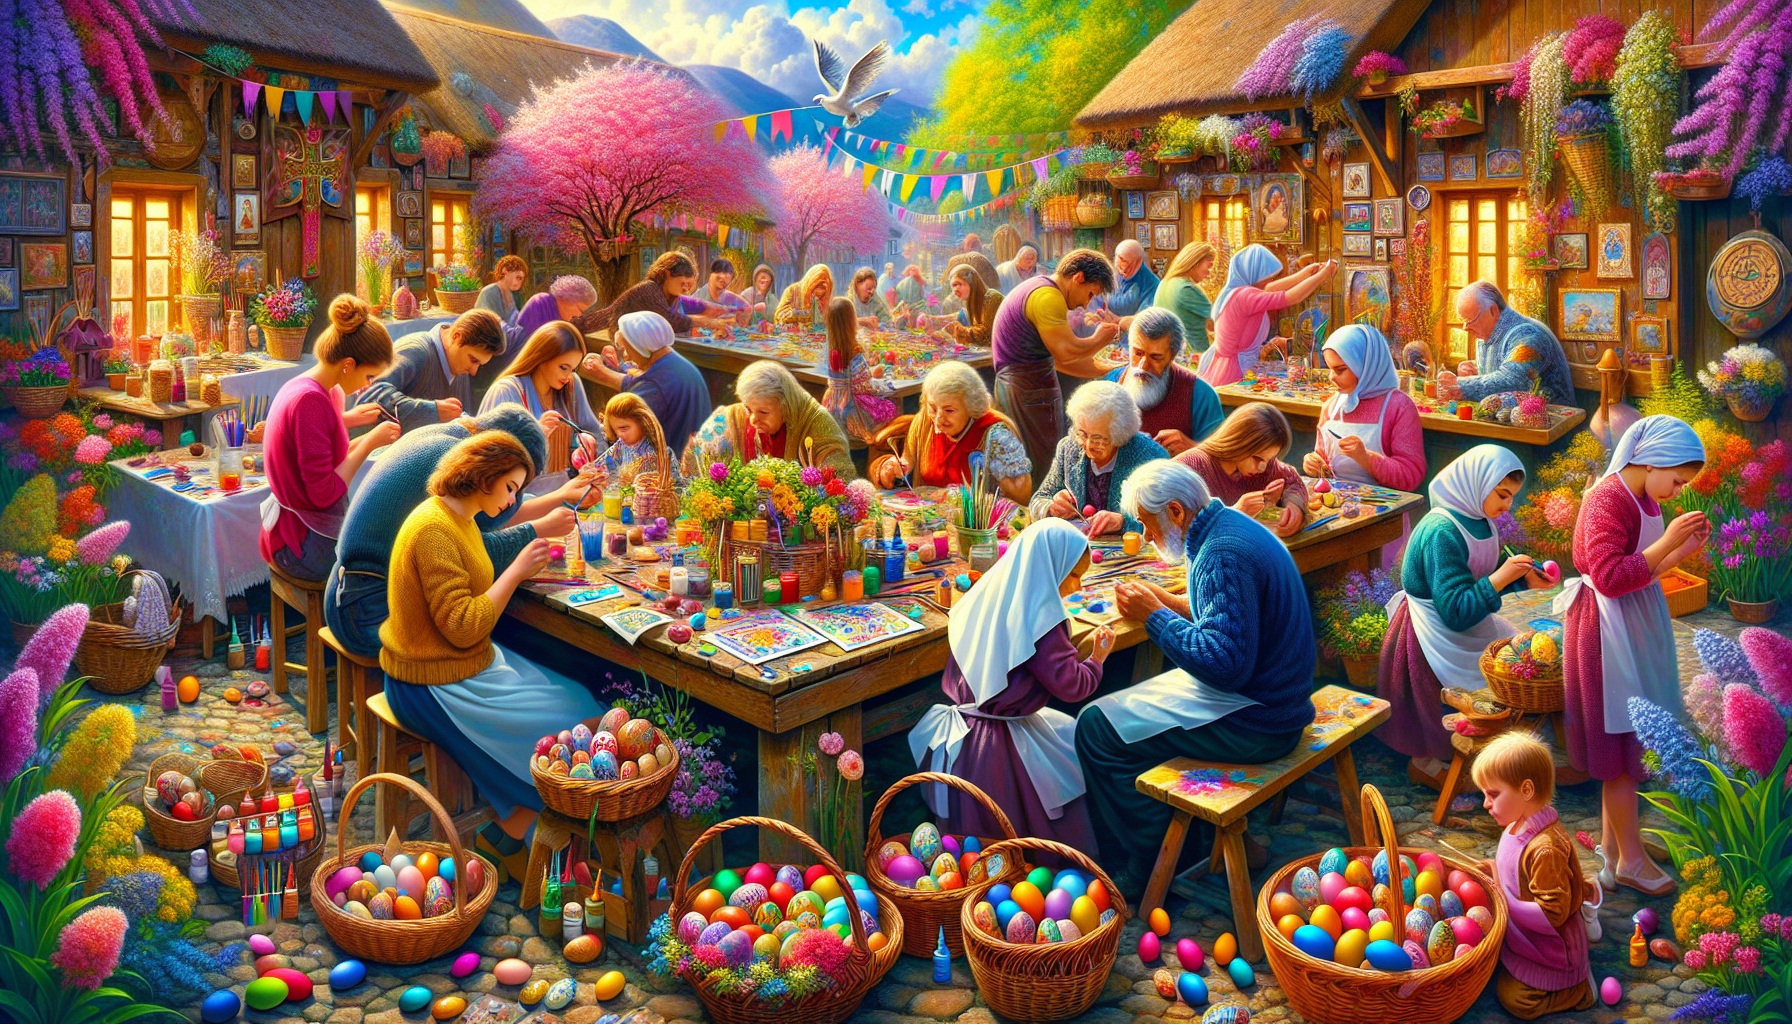 Colorful Easter egg painting workshop in a rustic village setting, with people of diverse ages and ethnicities joyfully decorating eggs around a wooden table, surrounded by baskets of colorful eggs, s